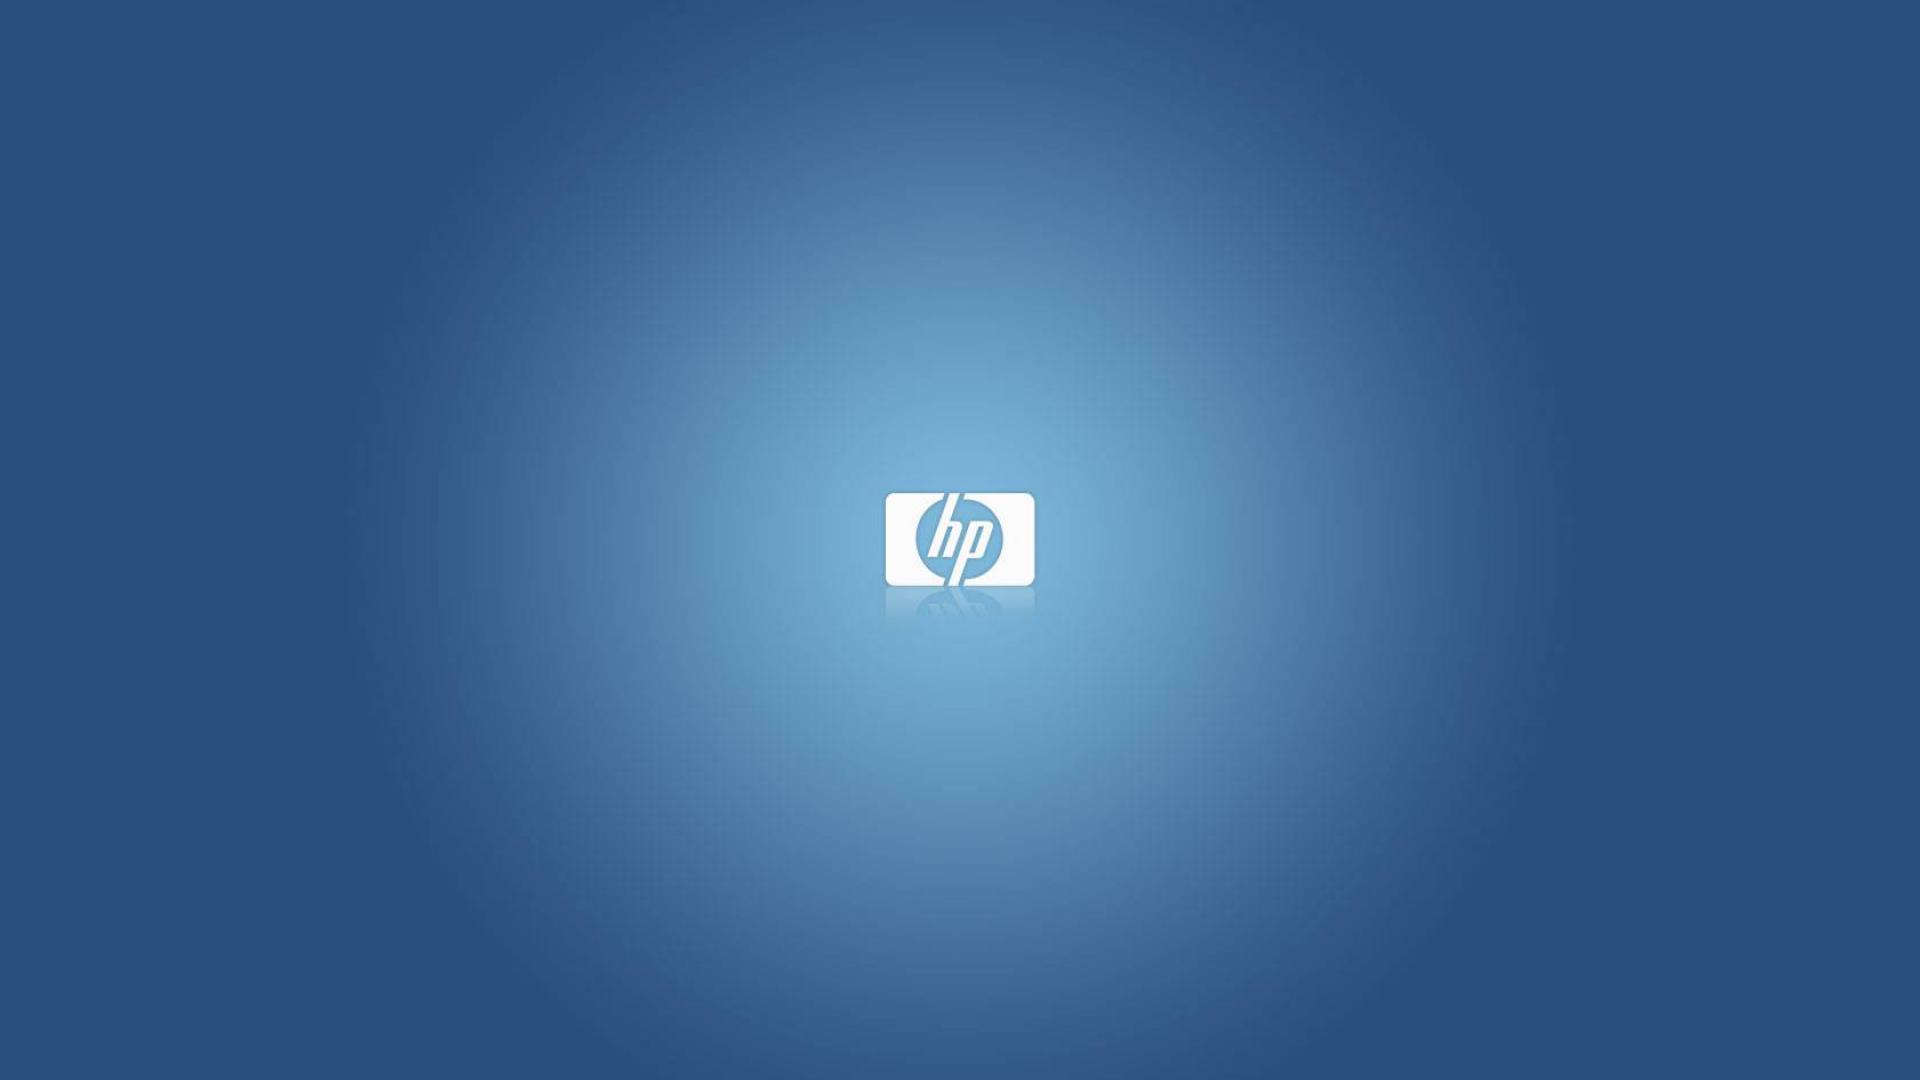 Hp Wallpaper High Quality And Resolution On